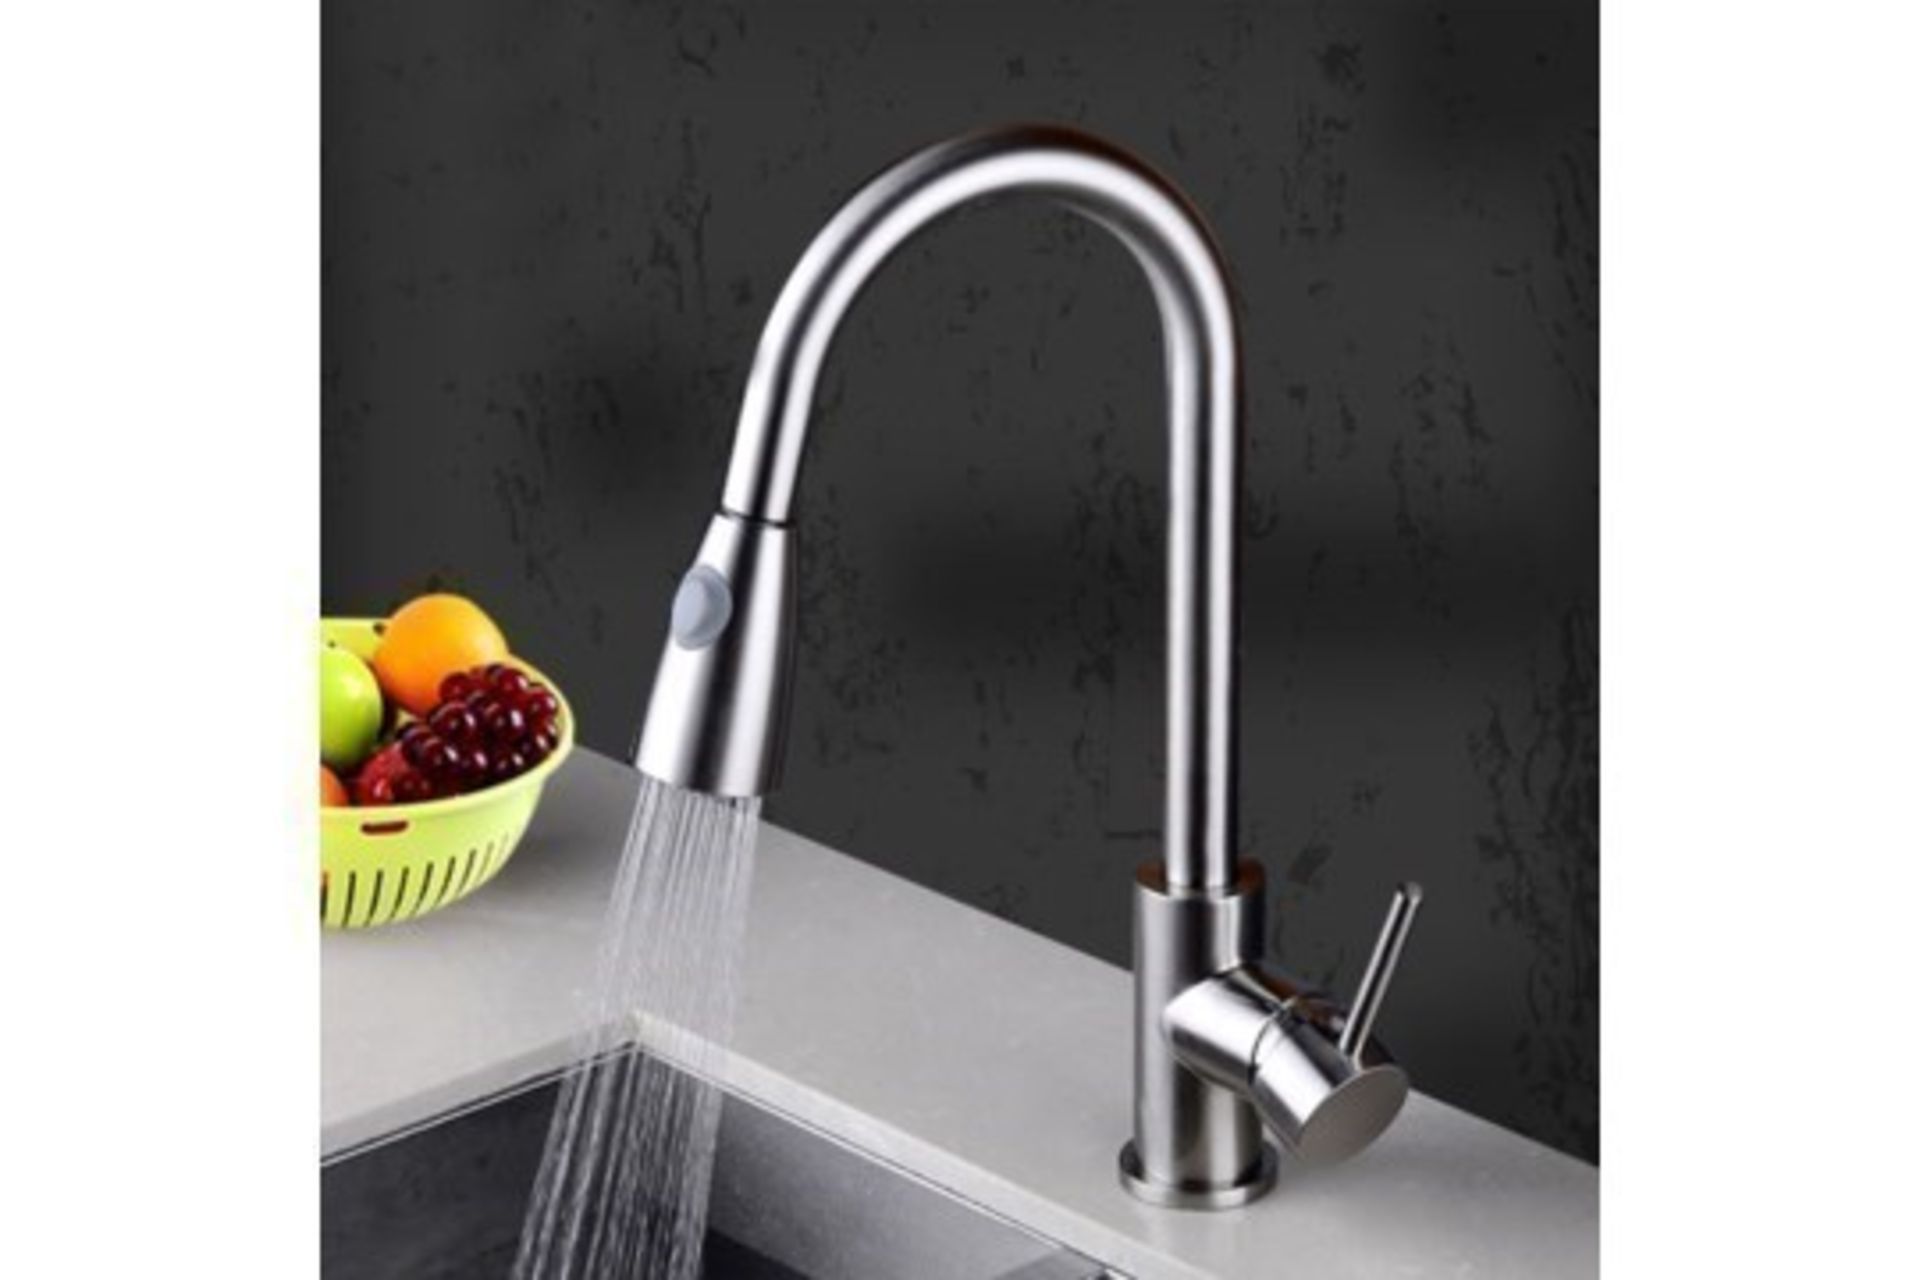 New & Boxed Della Modern Monobloc Chrome Brass Pull Out Spray Mixer Tap. RRP £299.99.This Tap Is